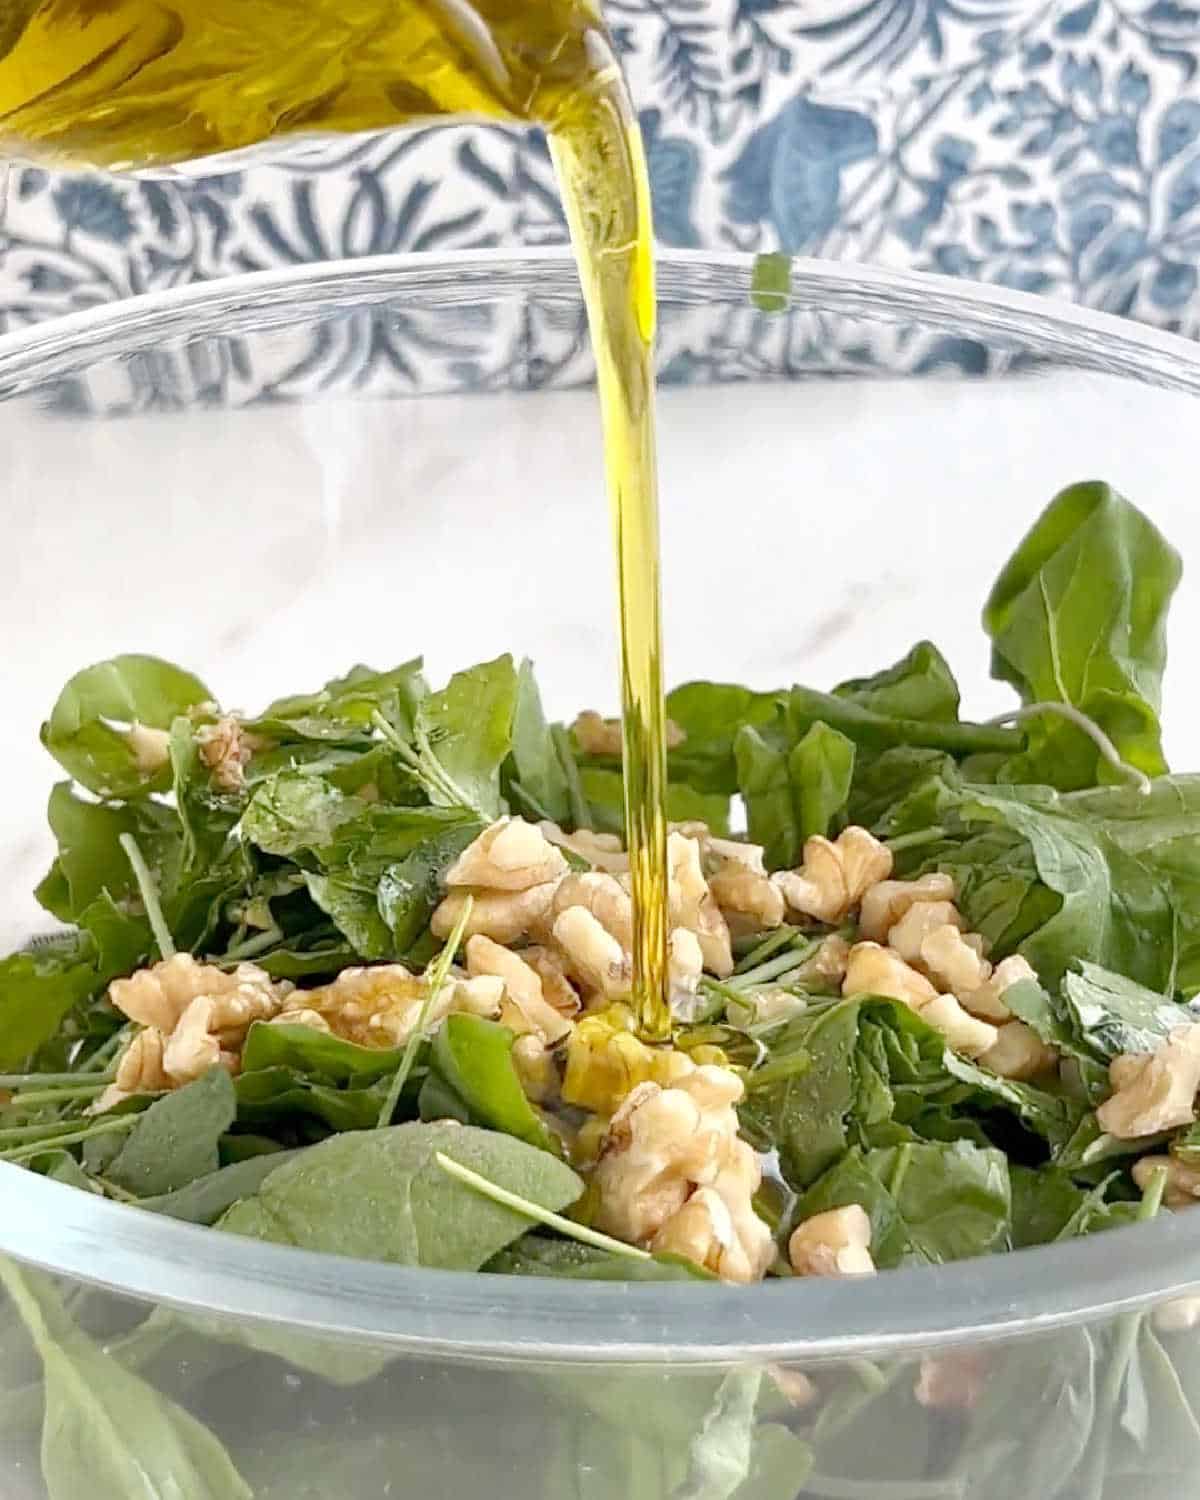 Adding oil to a glass bowl with walnuts and spinach leaves.